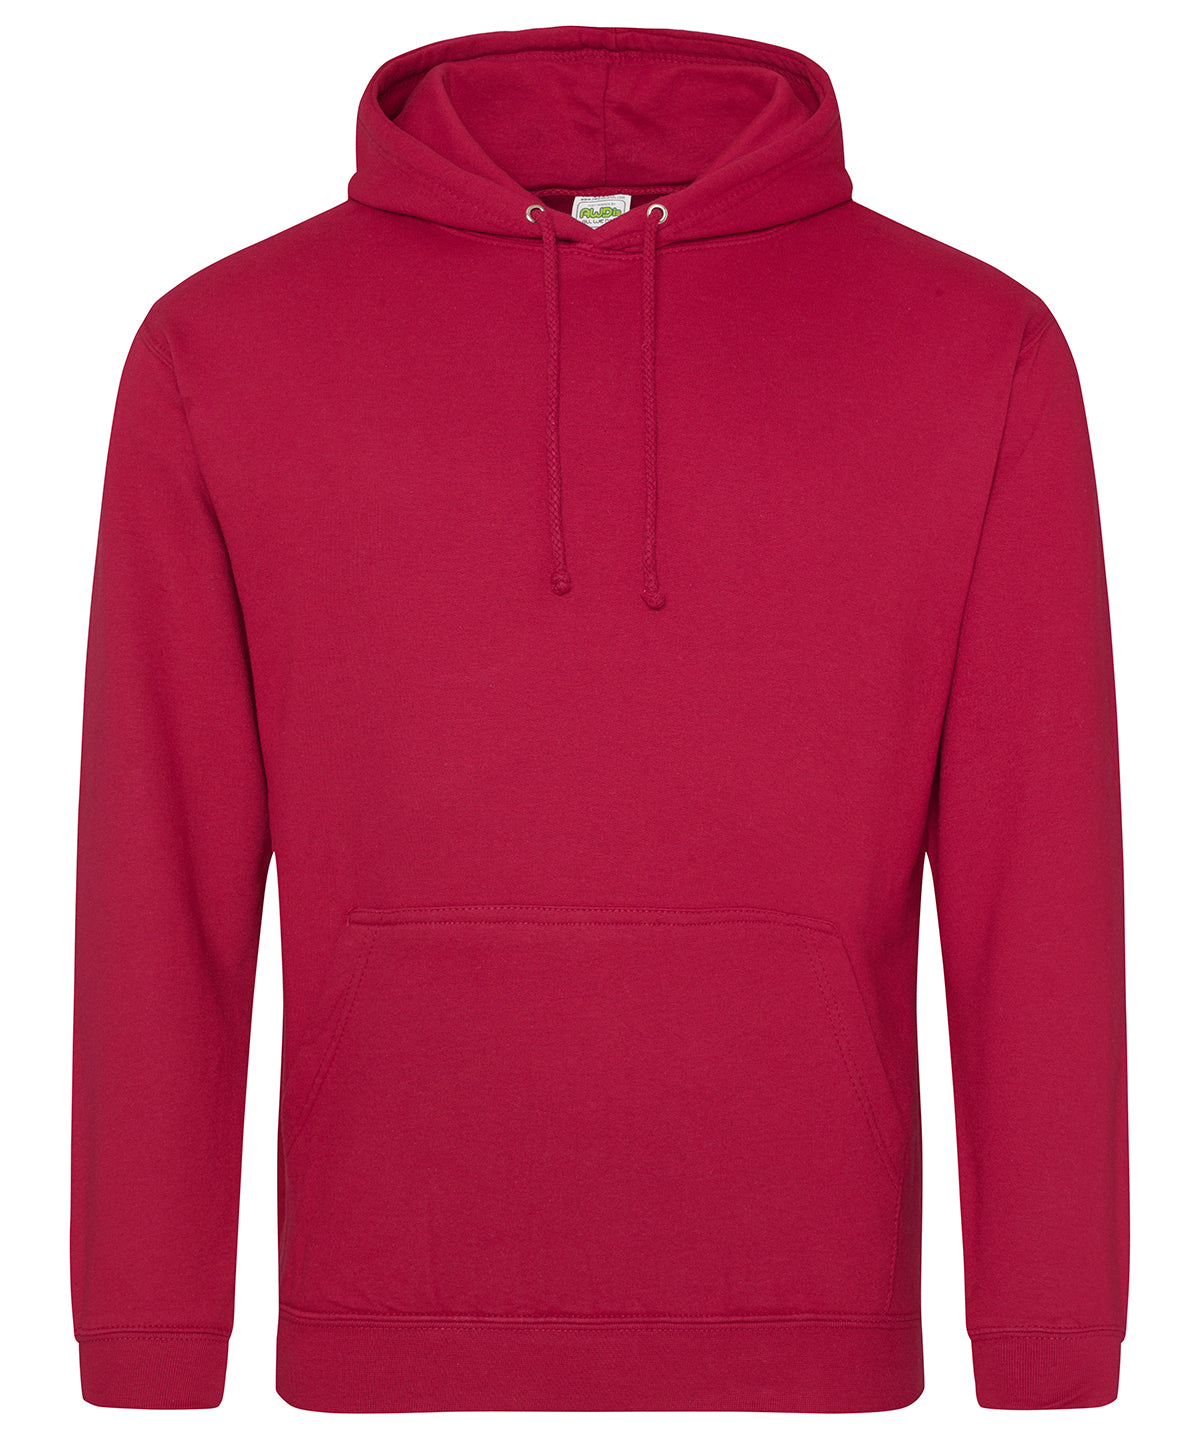 AWDis College hoodie Red Hot Chilli